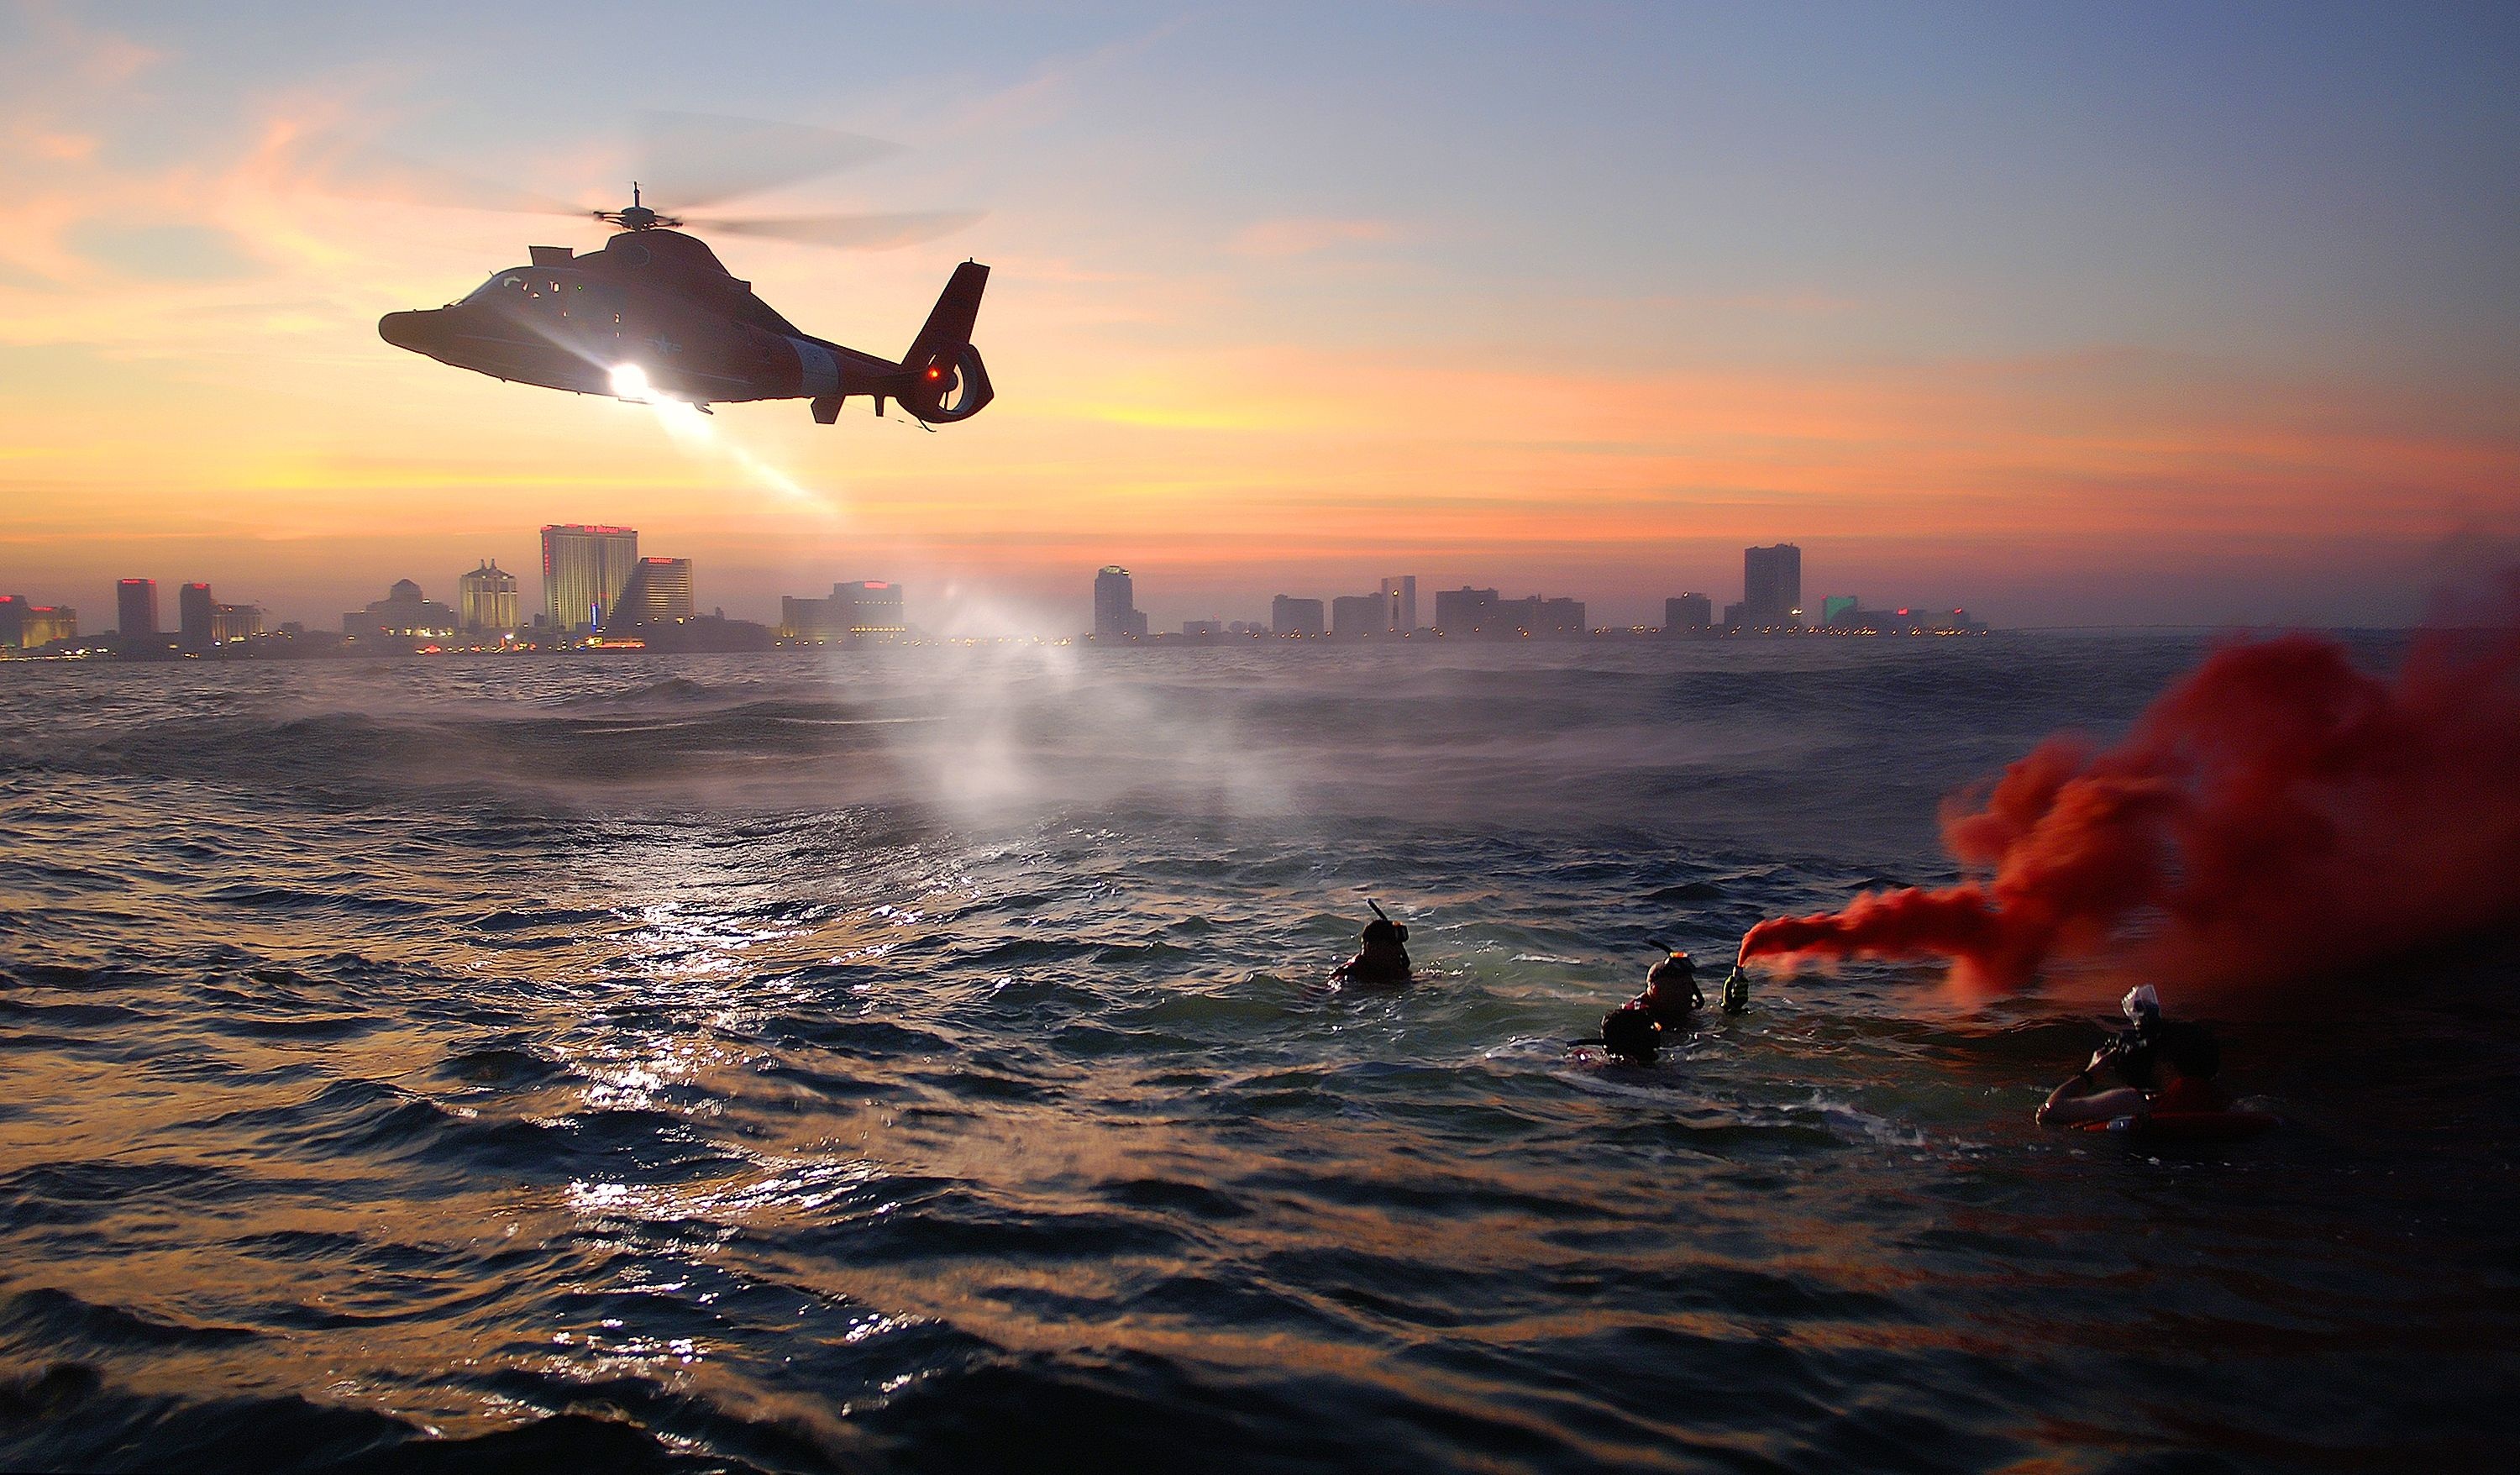 Helicopter flying over the Sea, Flying, Heli, Helicopter, Ocean, HQ Photo